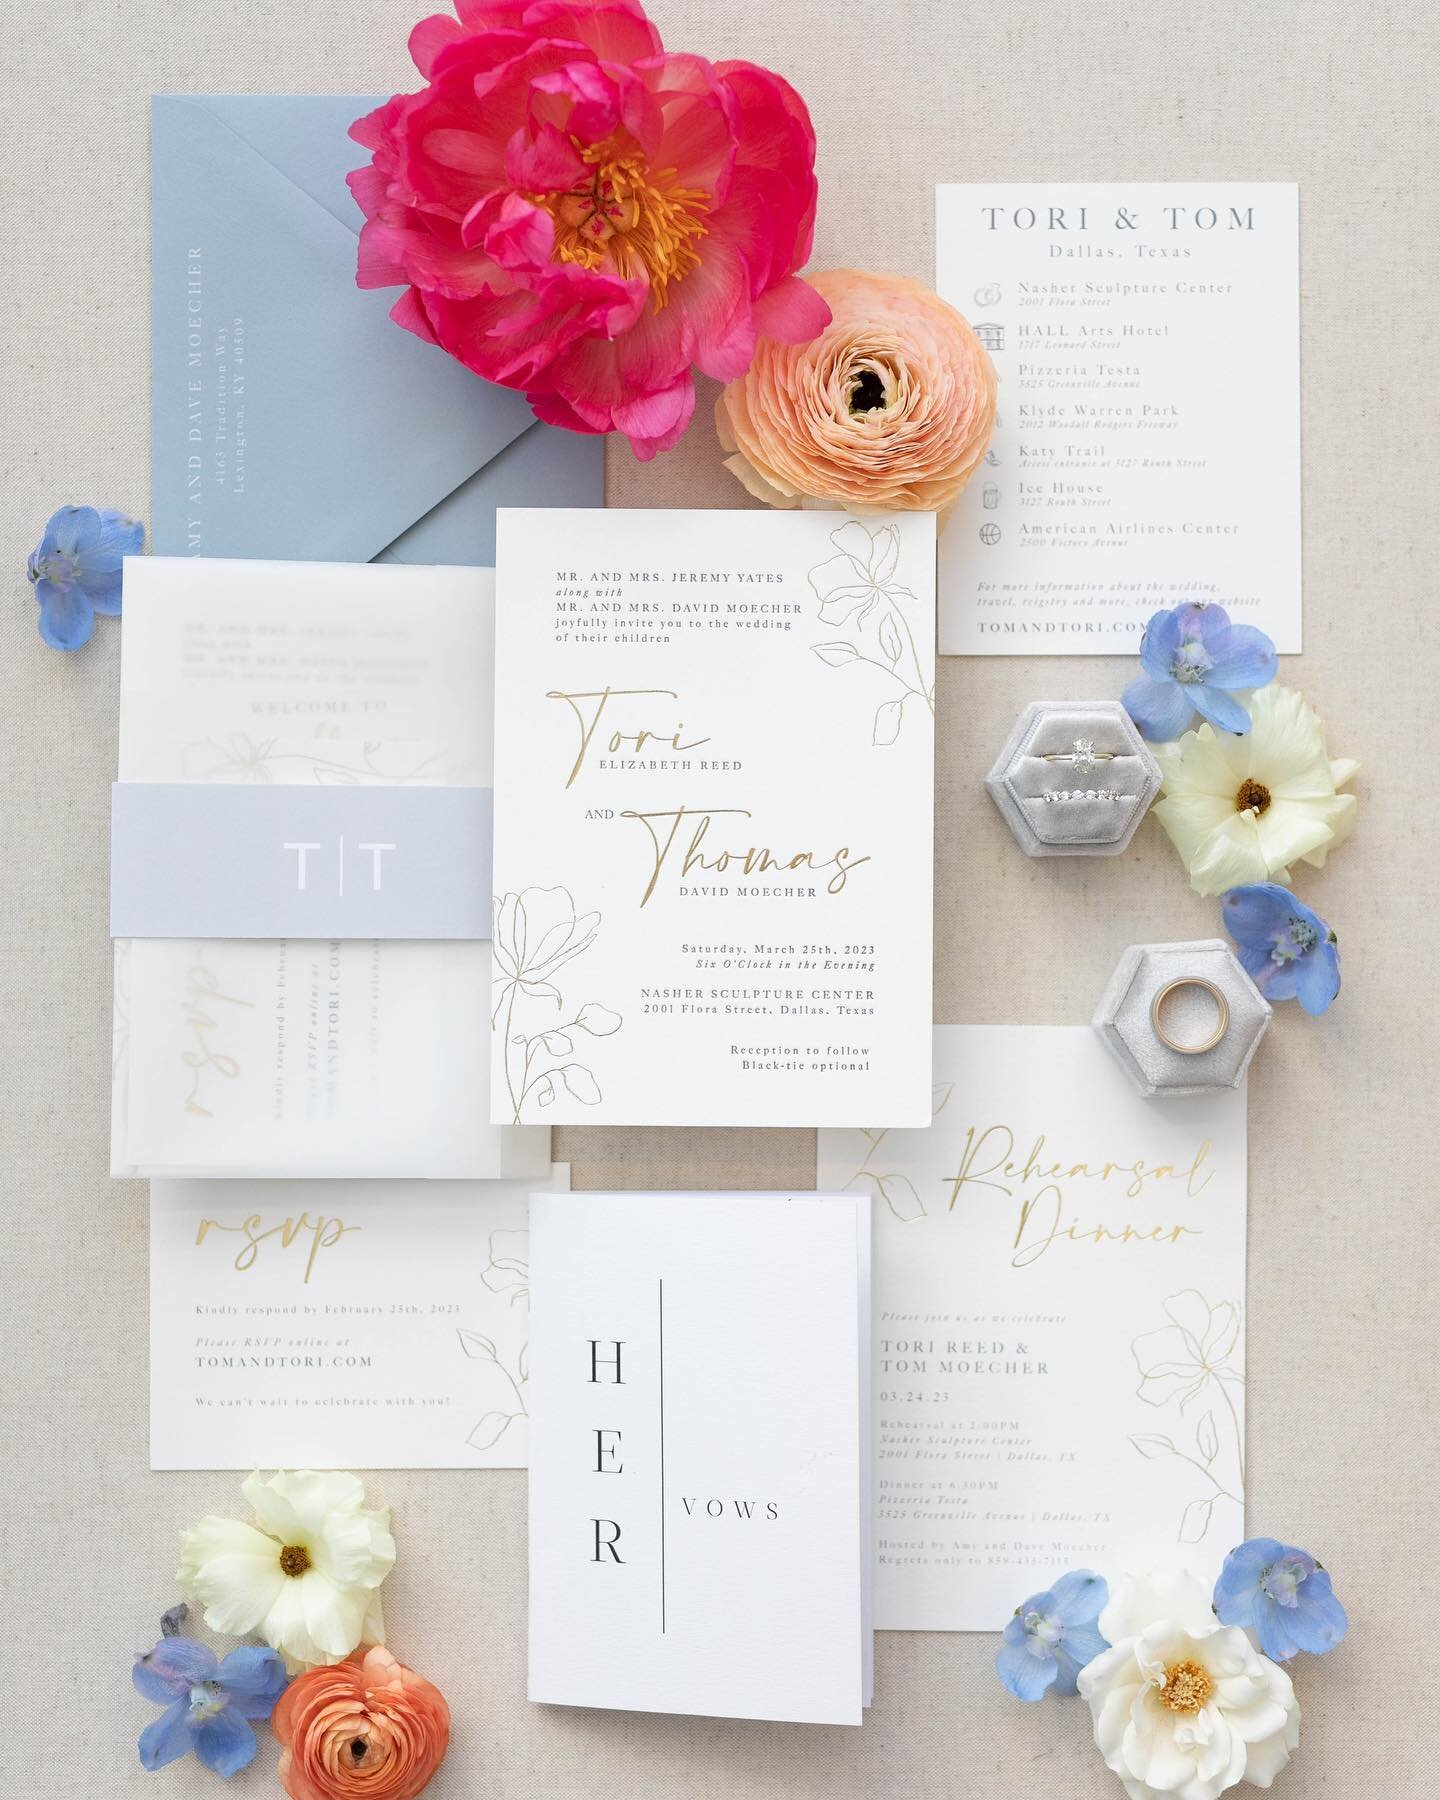 We loved this brides vision of clean invitations combined with the perfect pop of color 💐
&bull;
&bull;
&bull;
&bull;
&bull;
#florals #flatlay #weddingphotography #weddinginvitations #weddingstationery #summerwedding #springwedding #dallaswedding #l